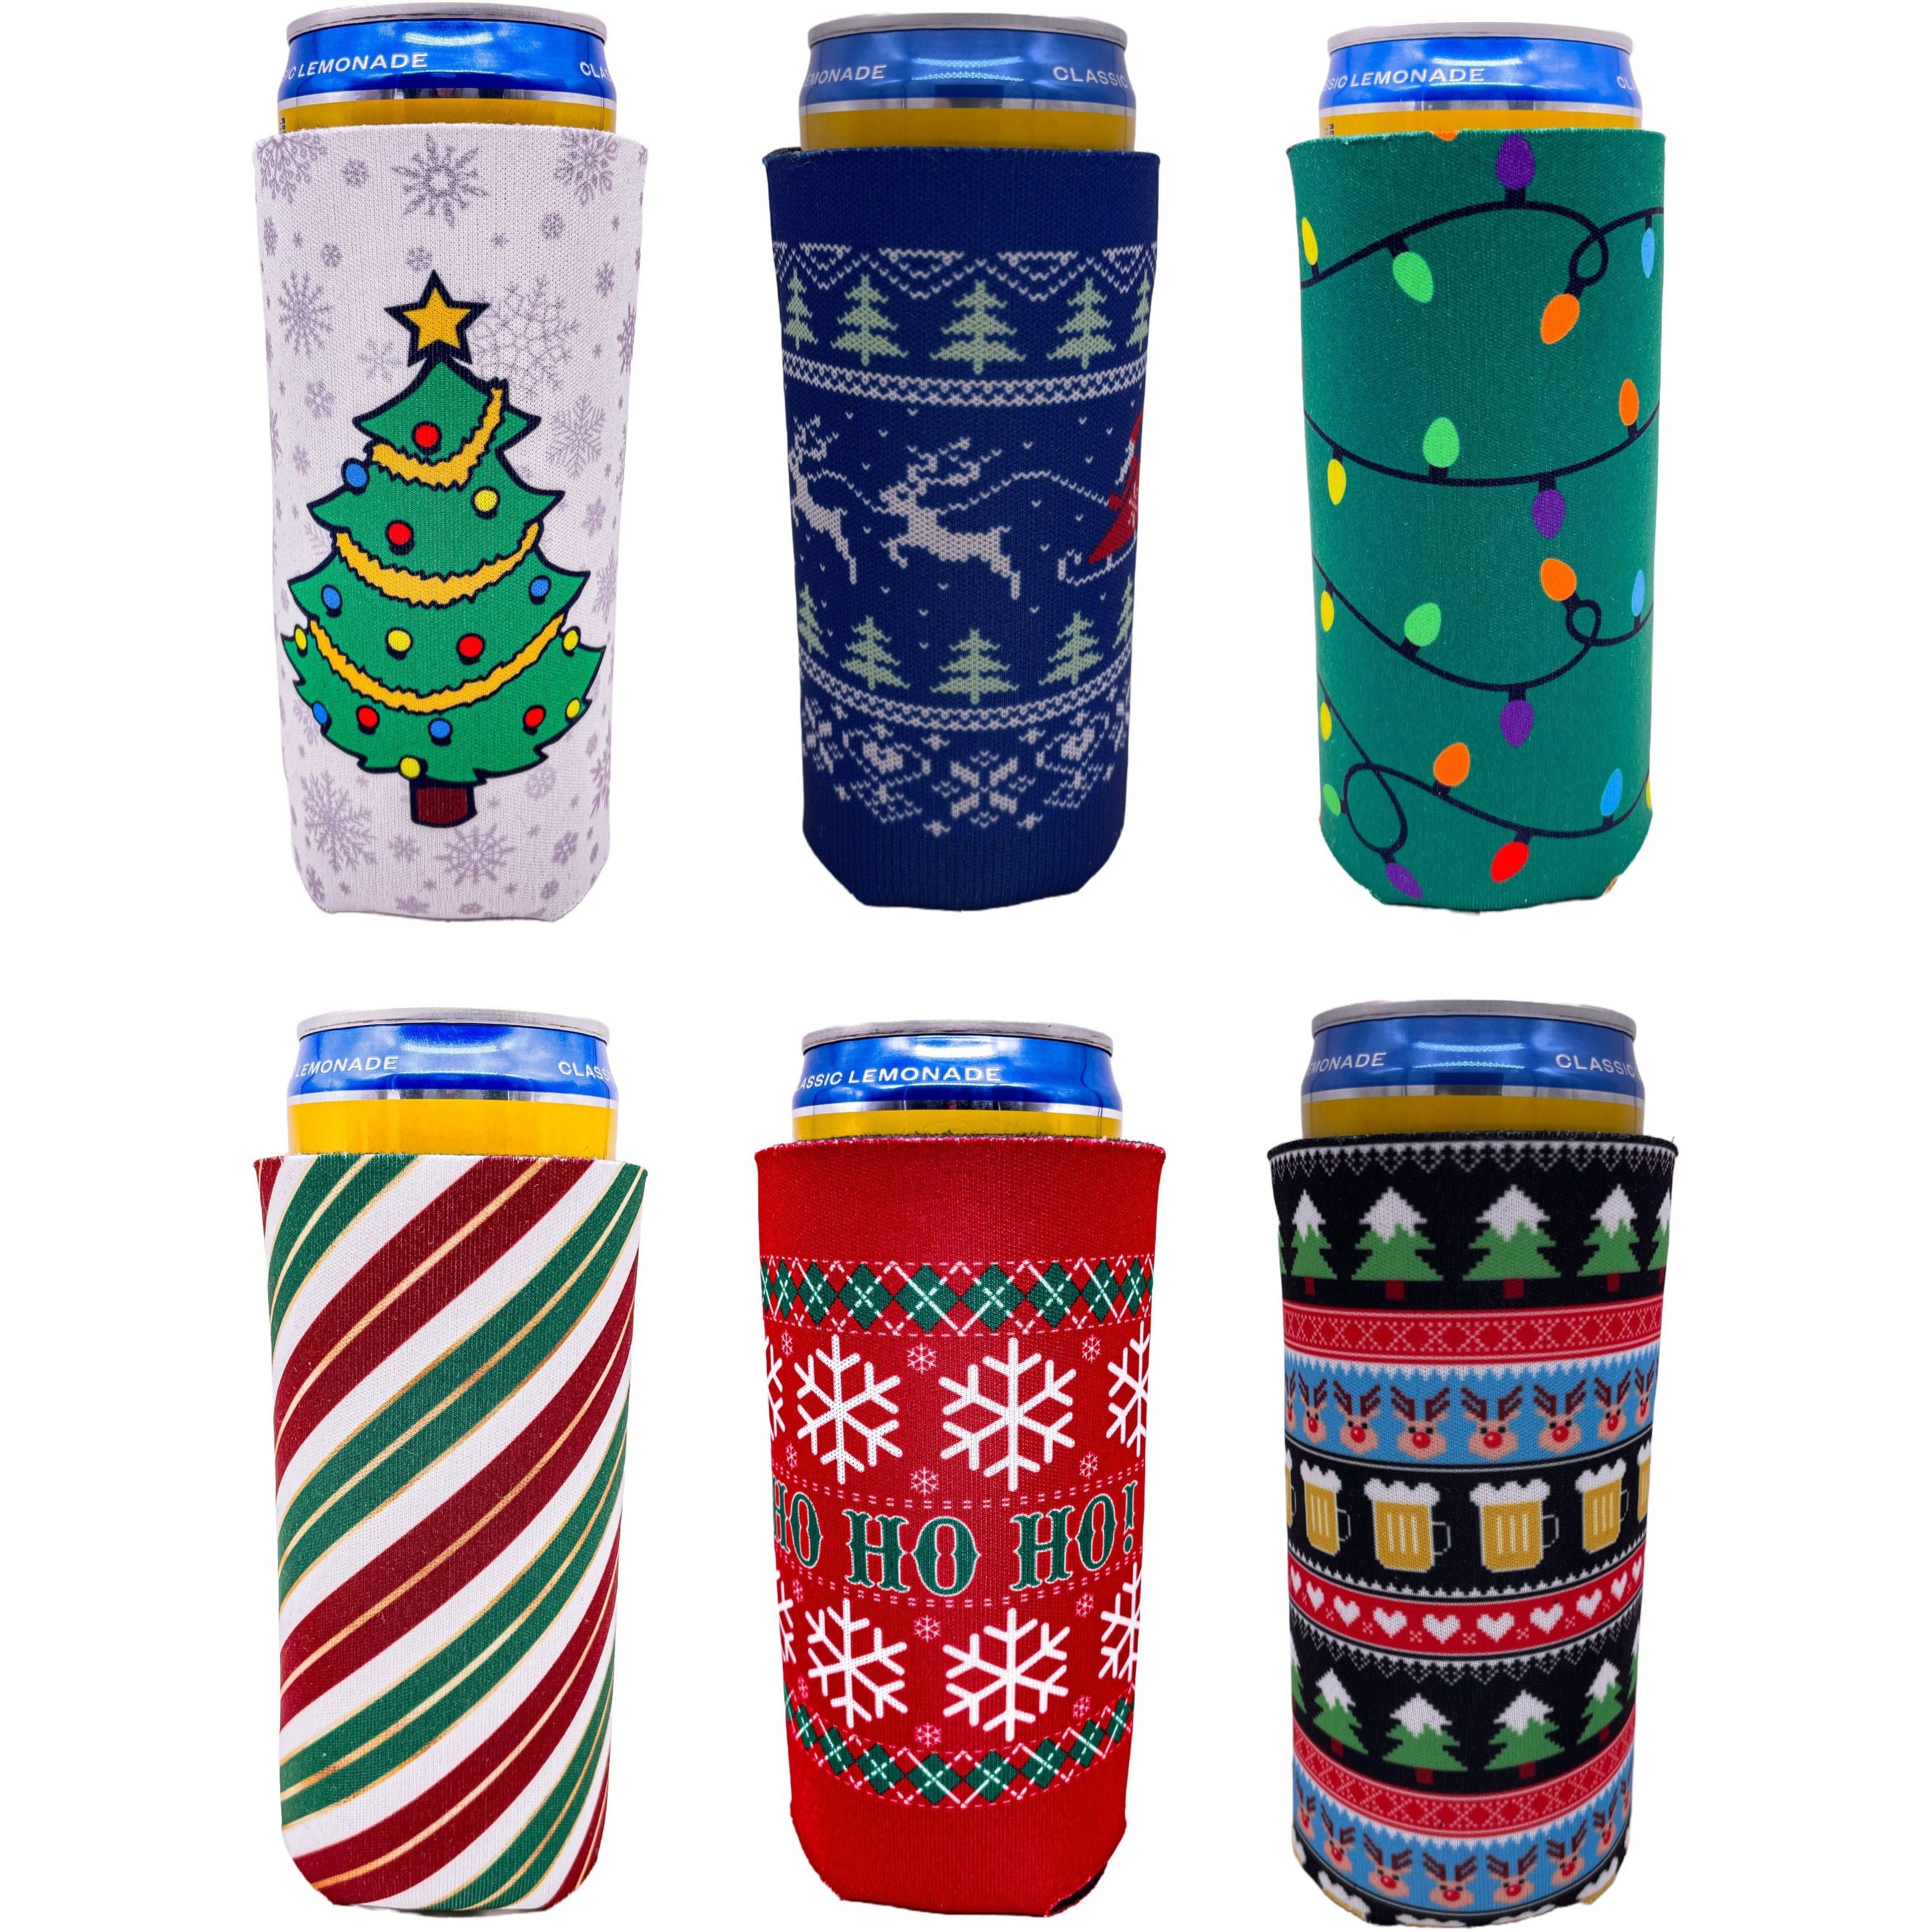 Holiday Festive Christmas in July Slim Can Coolers - 6 Pack